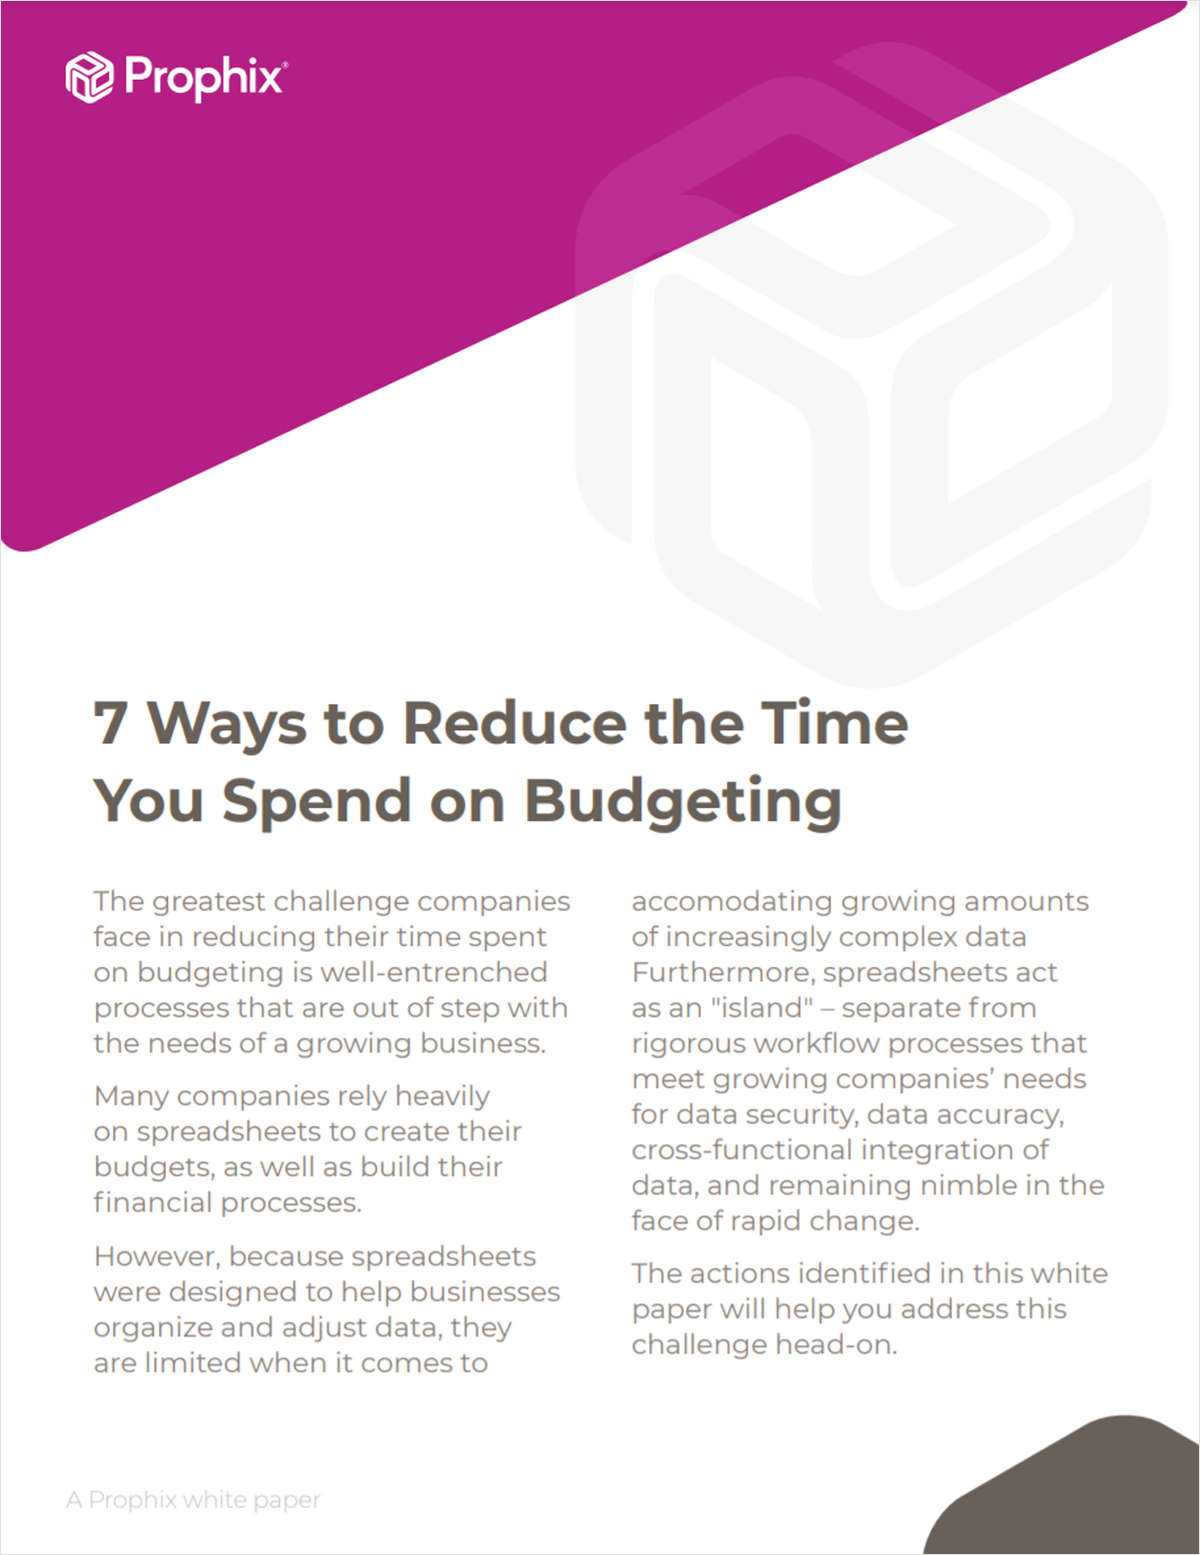 7 Tips to Save Time and Resources on Your Budgeting Process